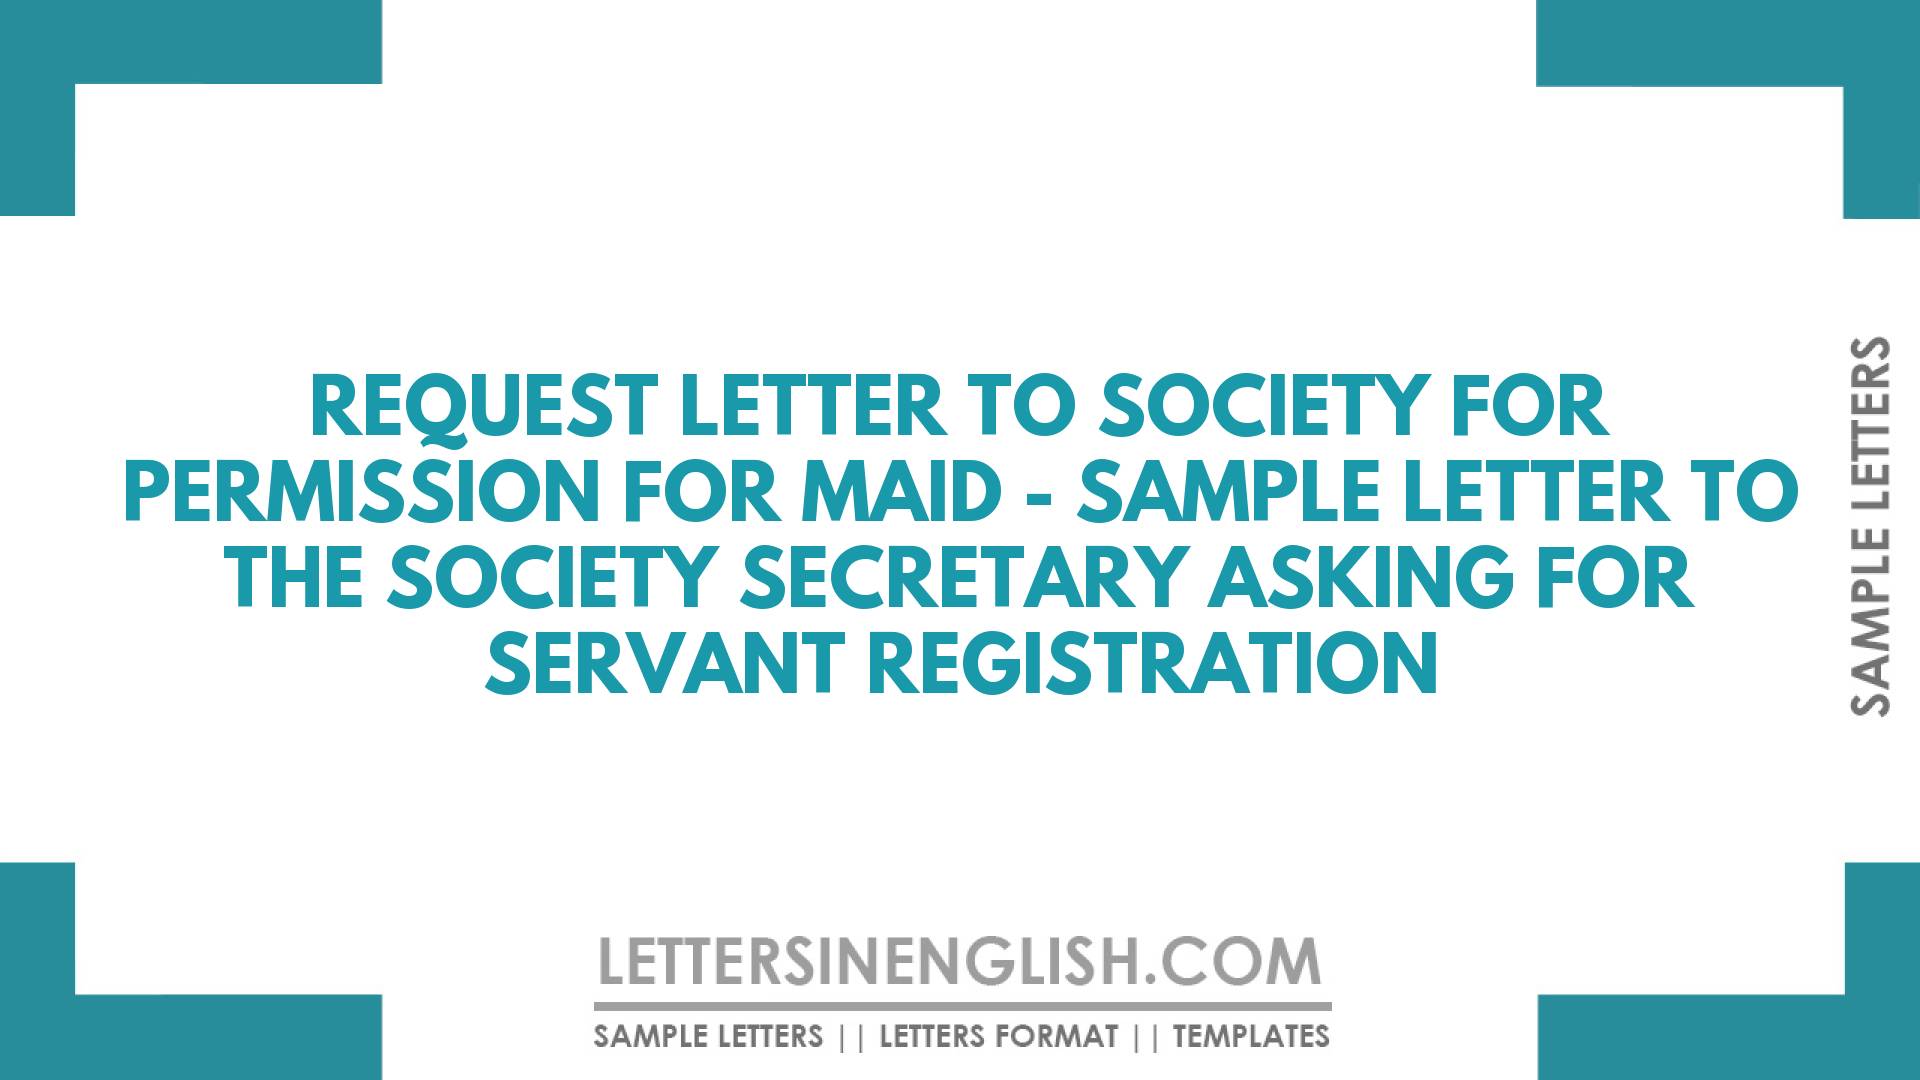 Request Letter to Society for Permission for Maid – Sample Letter to the Society Secretary Asking for Servant Registration